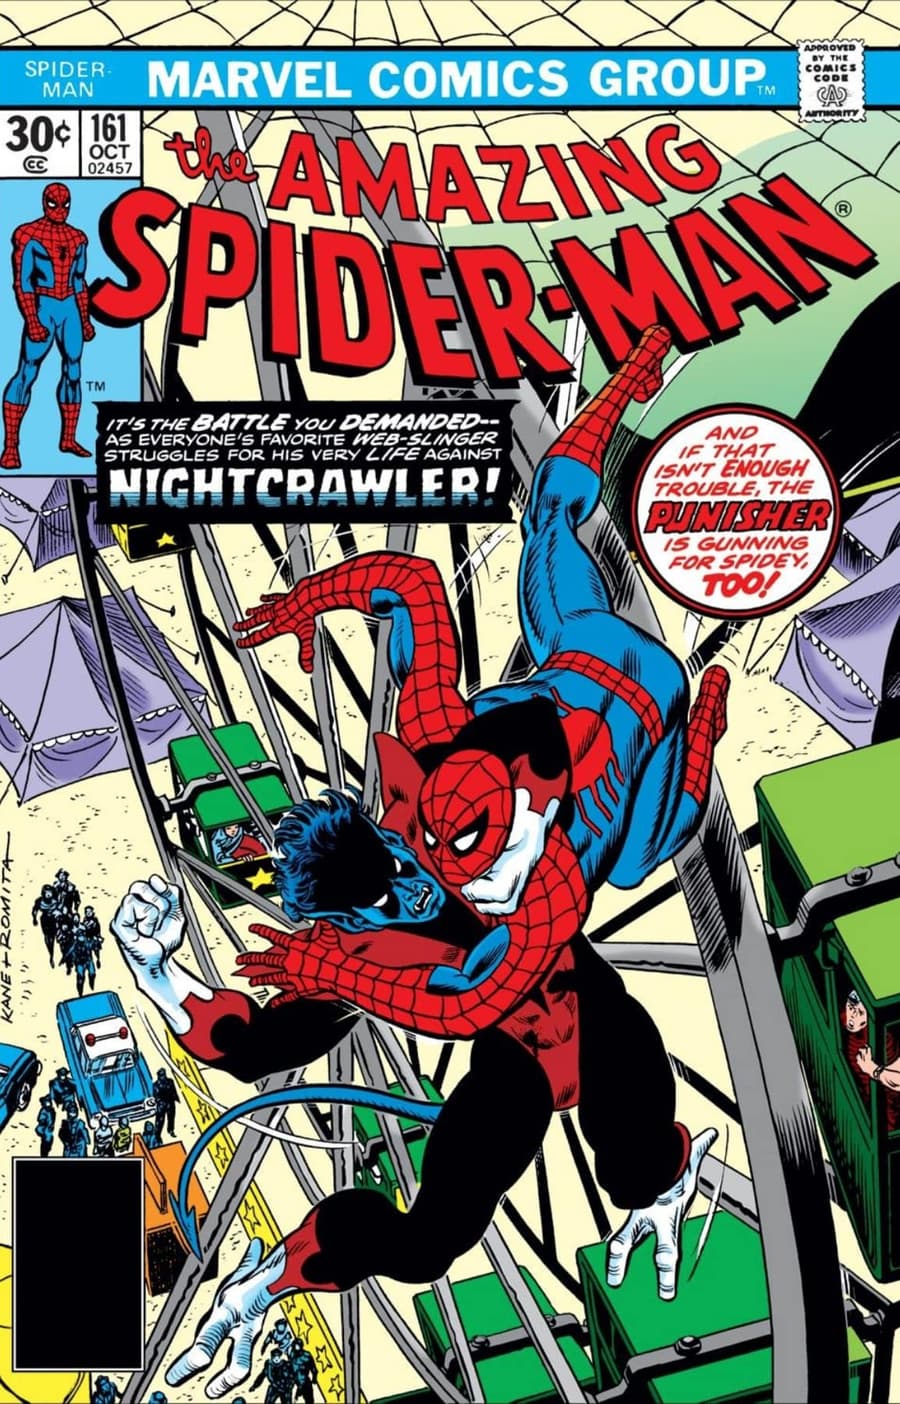 AMAZING SPIDER-MAN (1963) #161 cover by Gil Kane and John Romita Sr.